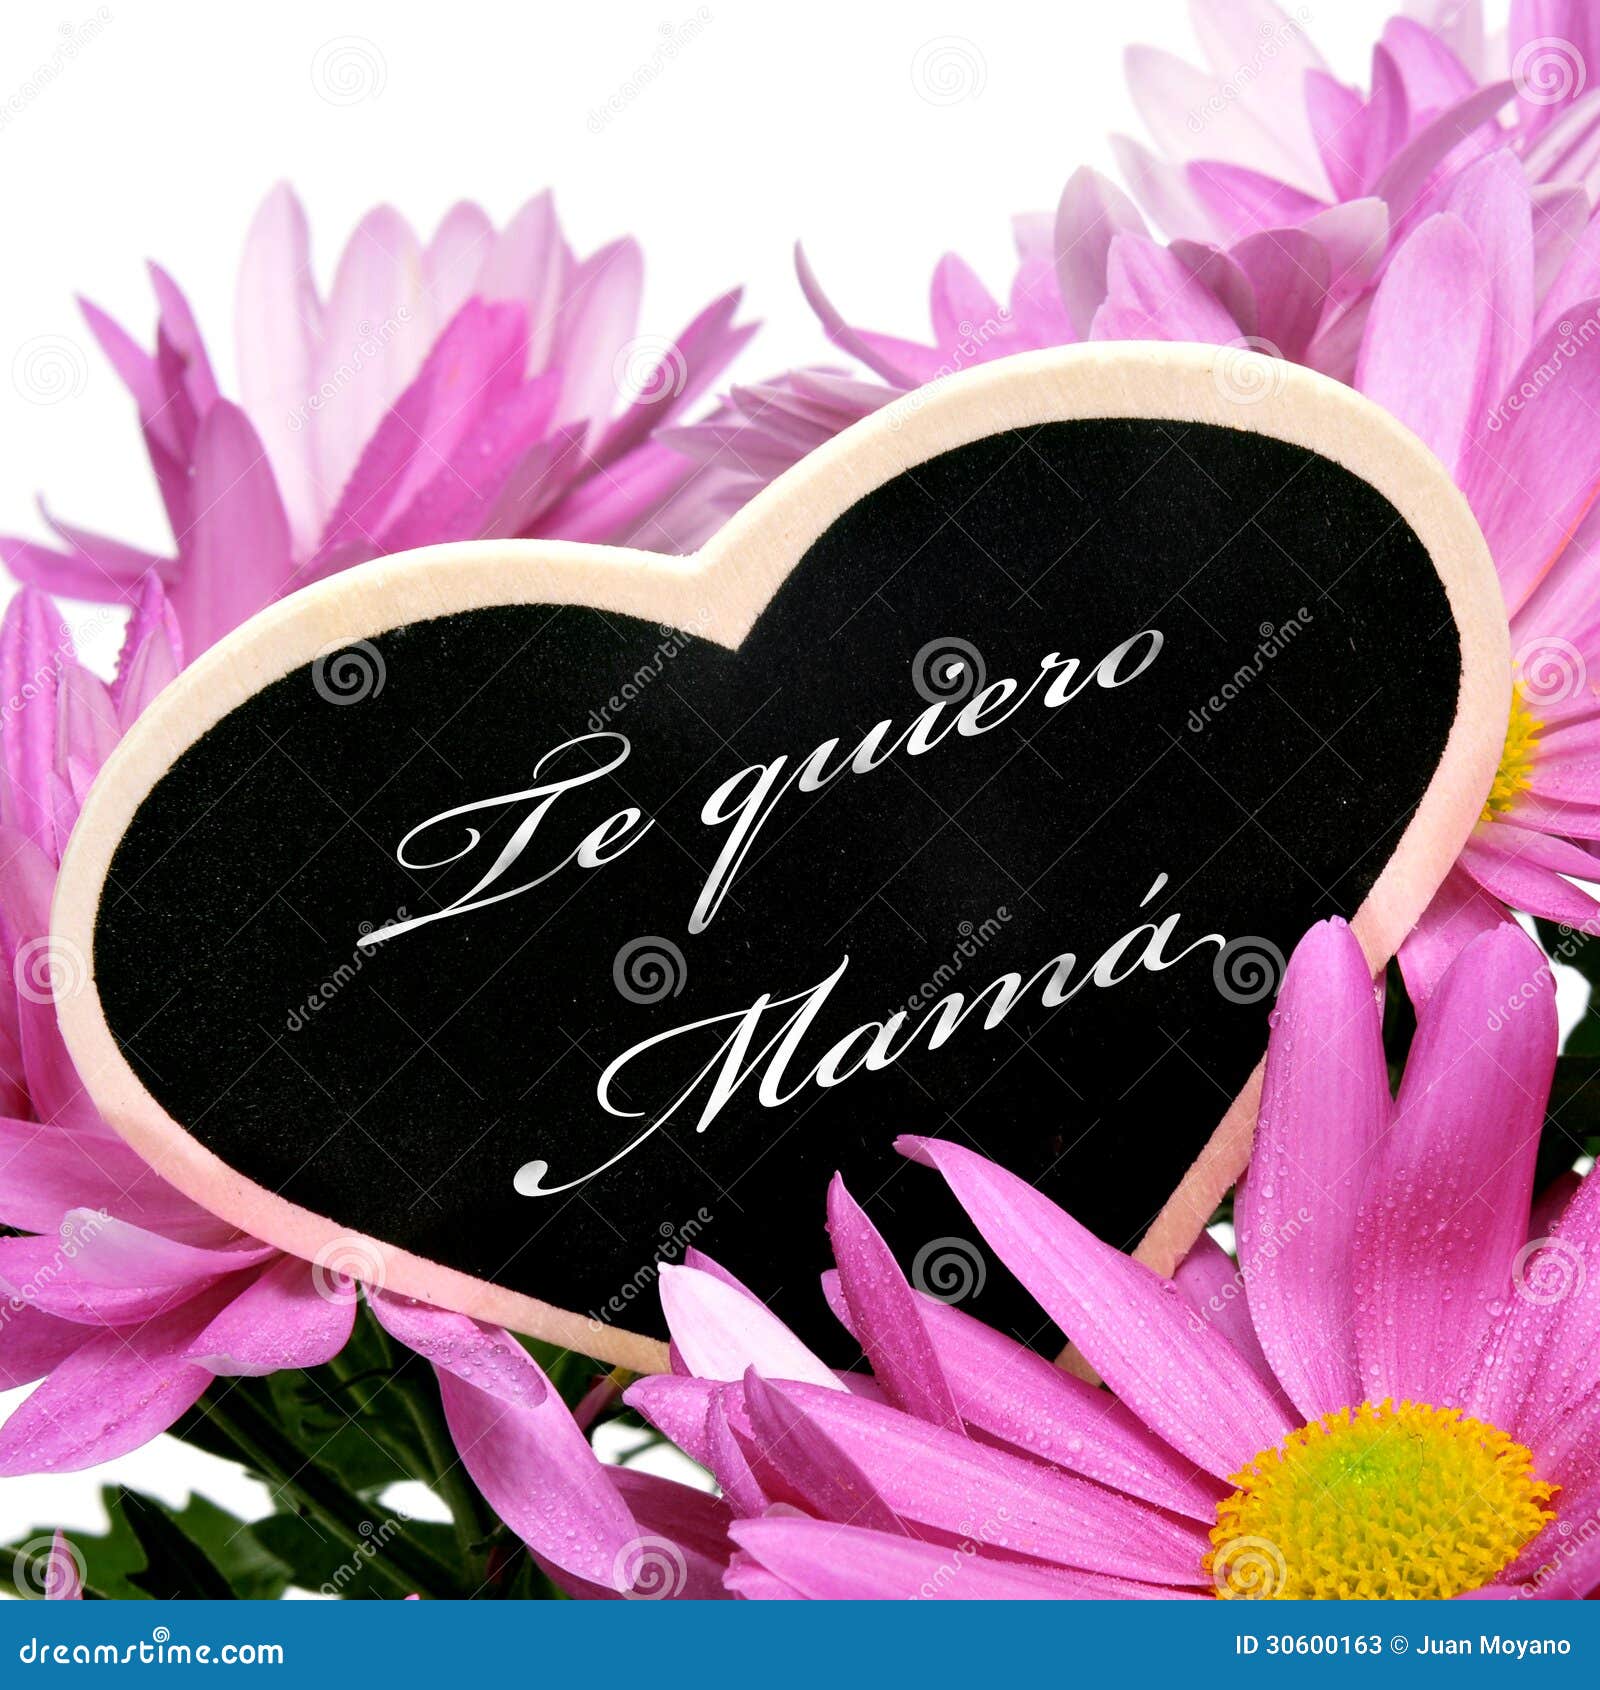 1 156 I Love You Mom Photos Free Royalty Free Stock Photos From Dreamstime